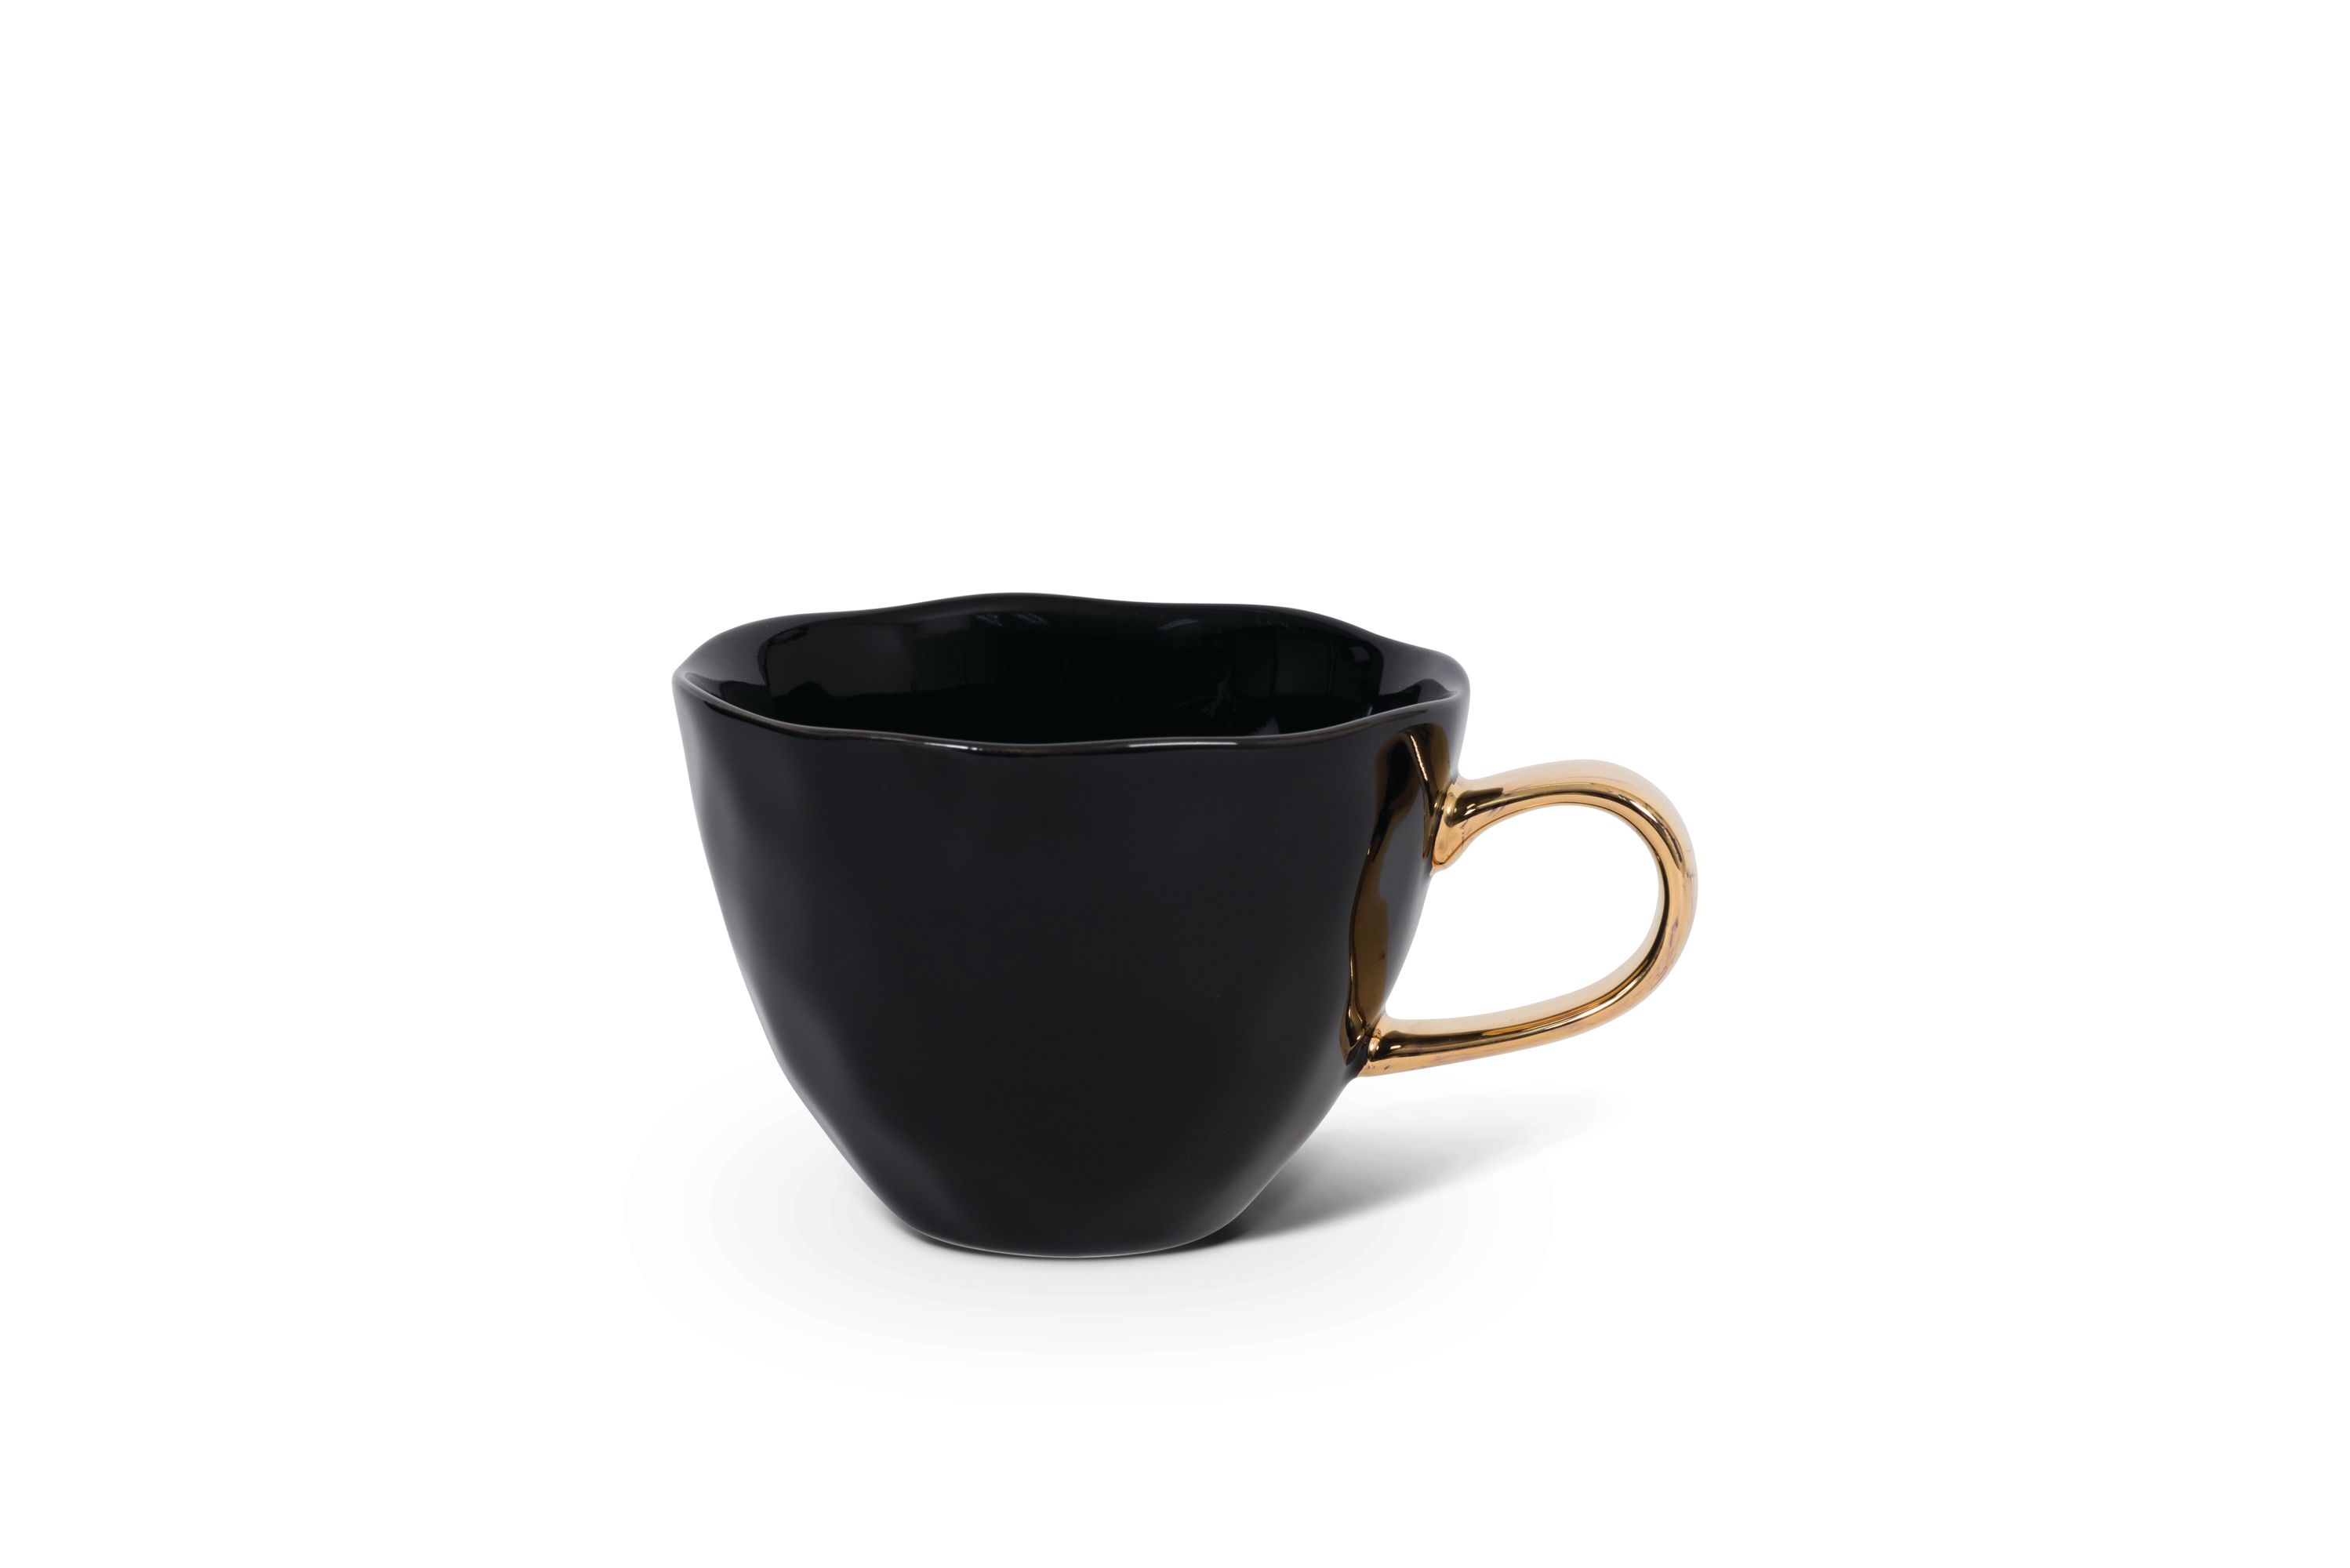 Unc Good Morning Cup Black Gift